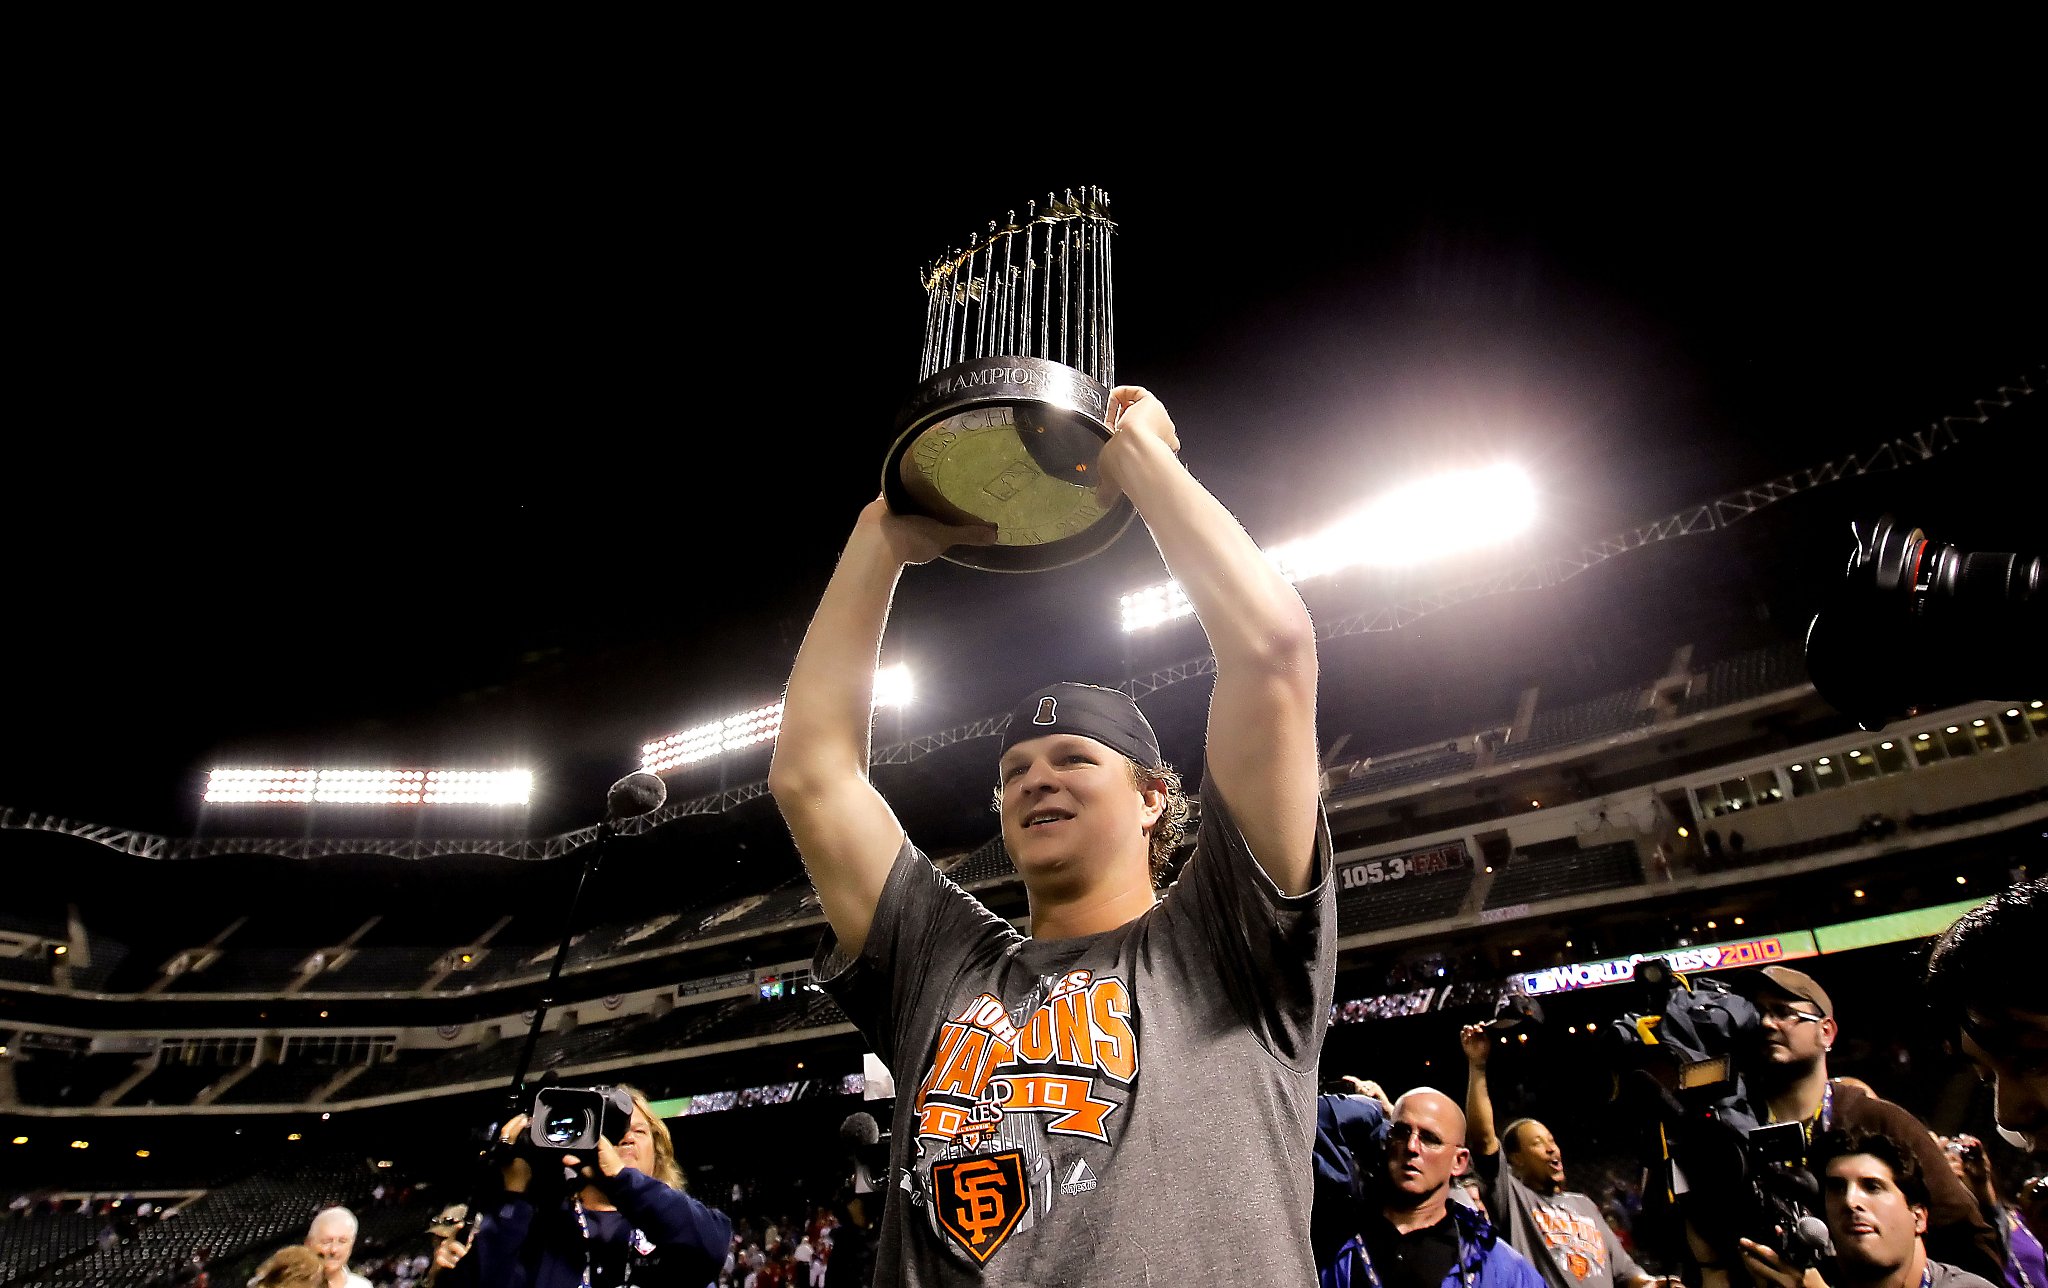 Tim Lincecum, Matt Cain, and other former Giants All-Stars - McCovey  Chronicles